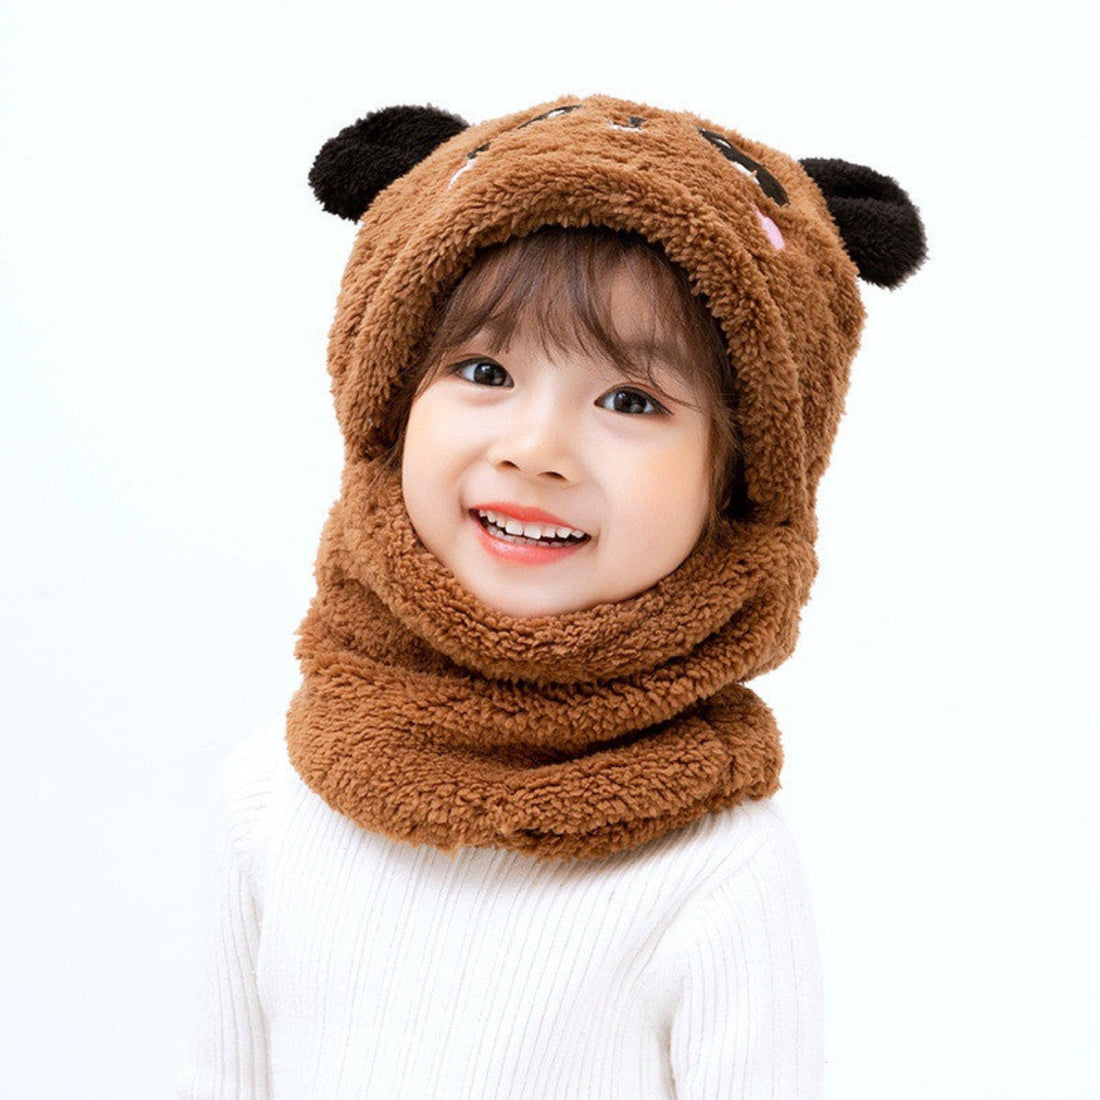 Girls' hat with ear protection and panda head design